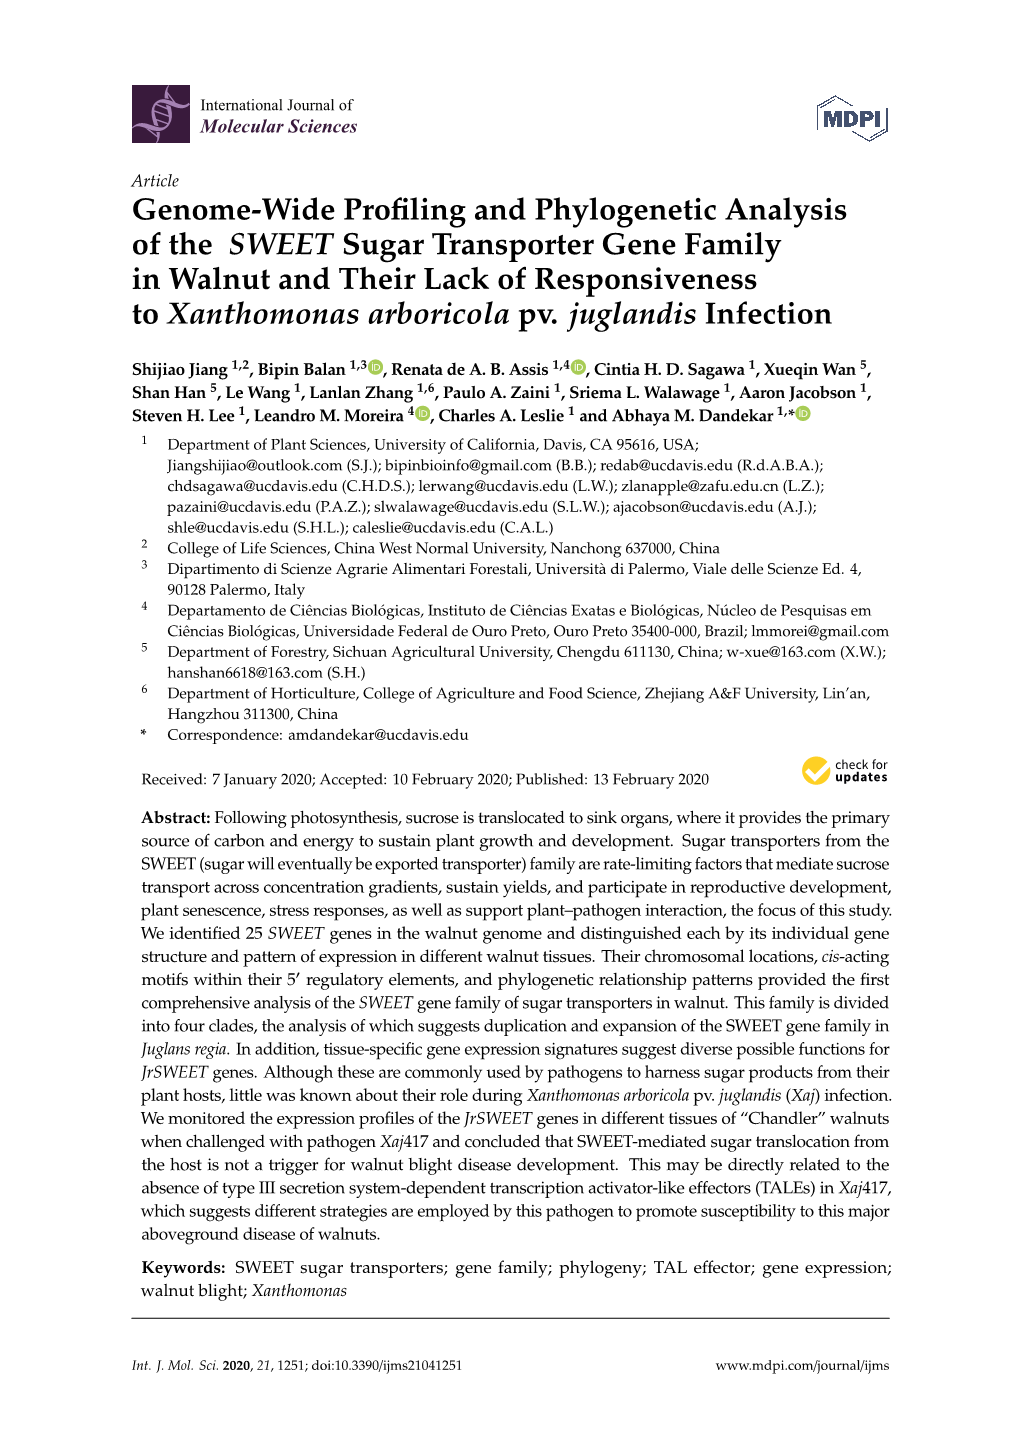 Genome-Wide Profiling and Phylogenetic Analysis of the SWEET Sugar Transporter Gene Family in Walnut and Their Lack of Responsiv